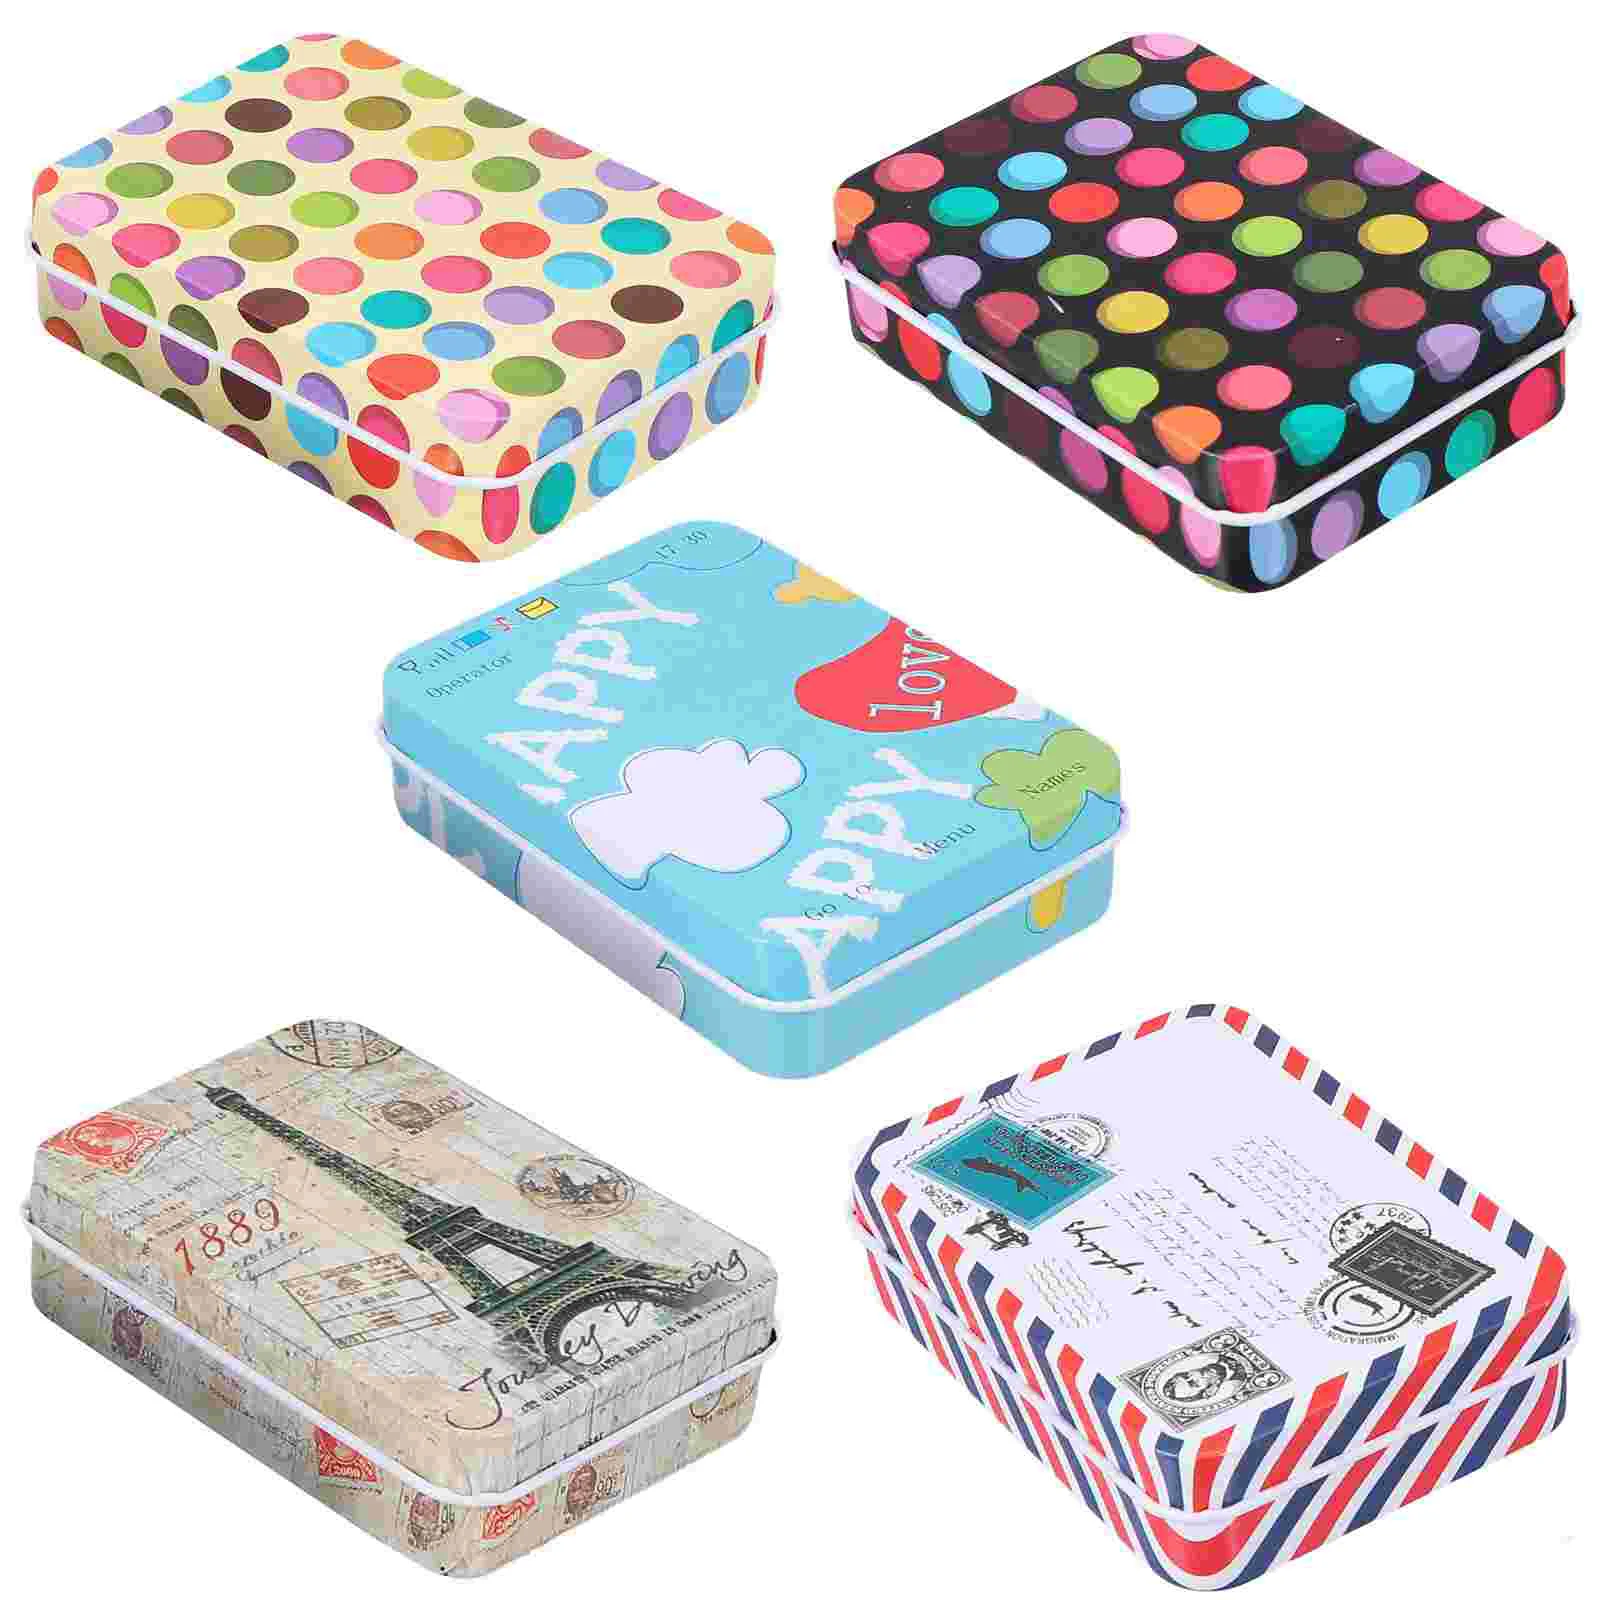 

Tins Containers Rectangular Empty Tin Box Metal Candy Box Tinplate Bakery Treat Boxes Tea Cookie Containers 5pcs